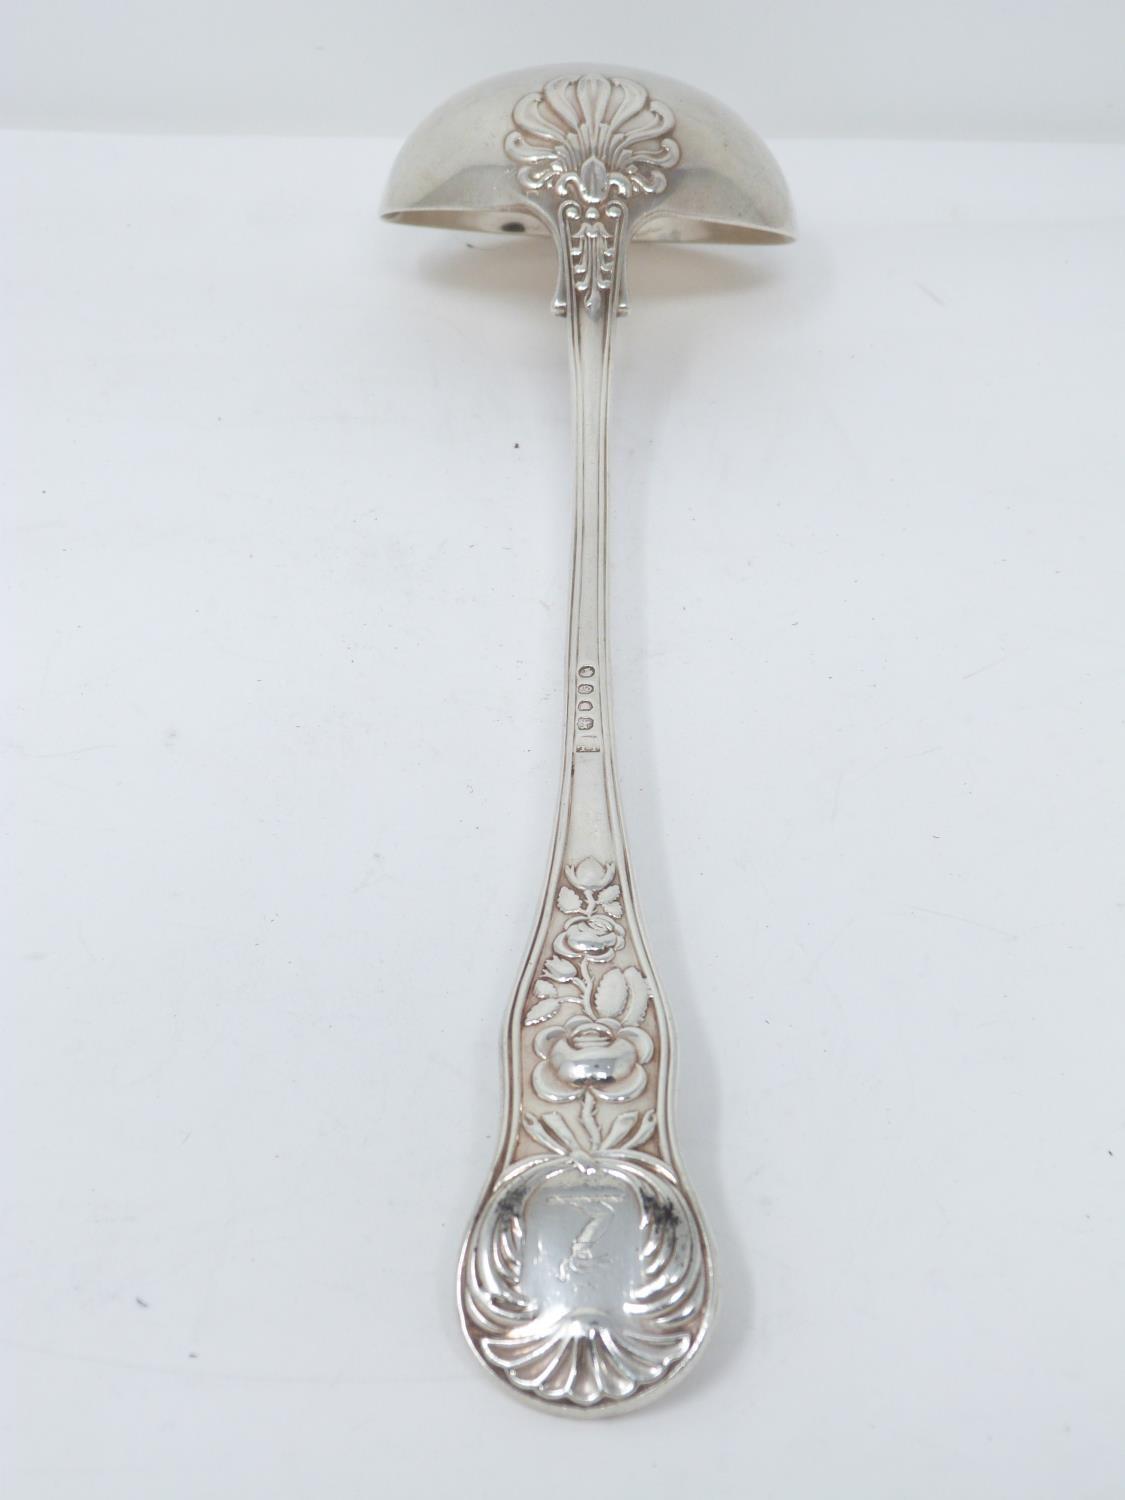 An early Victorian sterling silver soup ladle. Hallmarked: HI IL for John & Henry Lias, London 1845. - Image 4 of 8